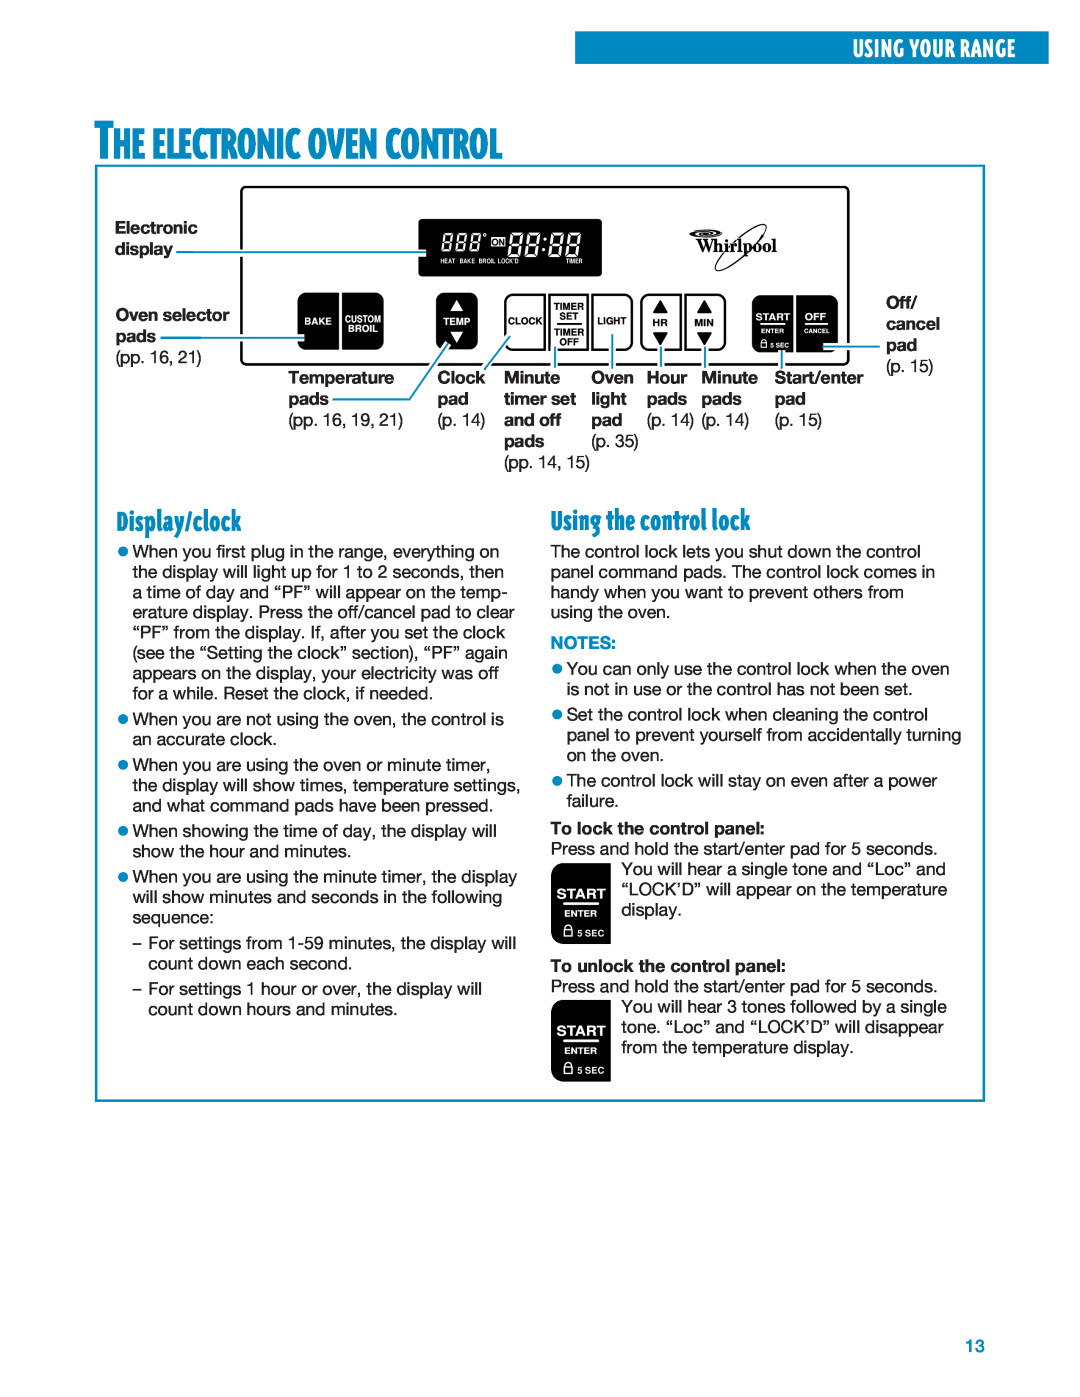 Whirlpool RF325PXE The Electronic Oven Control, Display/clock, Using the control lock, Using Your Range, Oven selector 